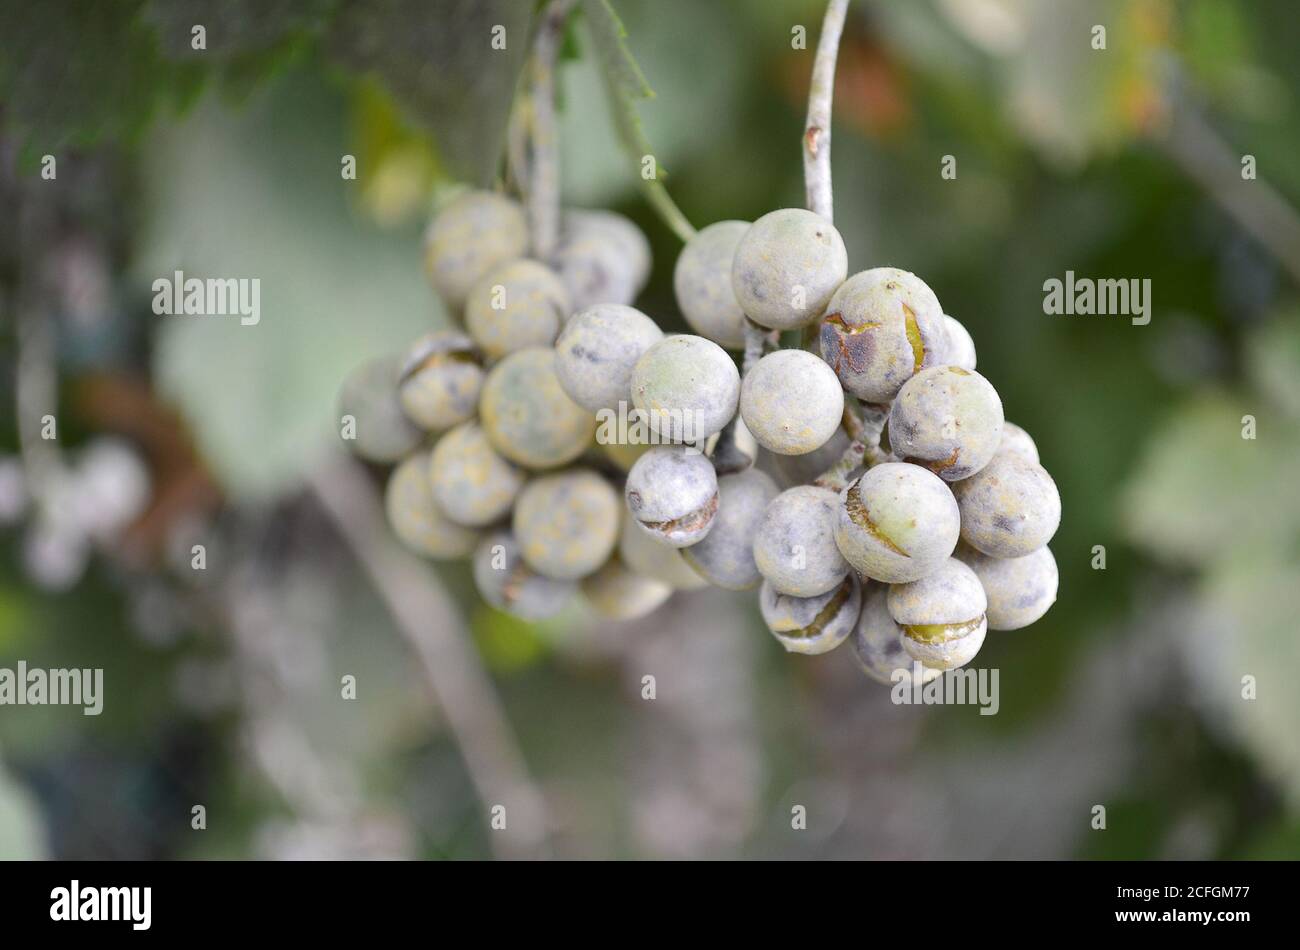 An overripe and dusty bunch of grapes in close-up with a blurry background Stock Photo